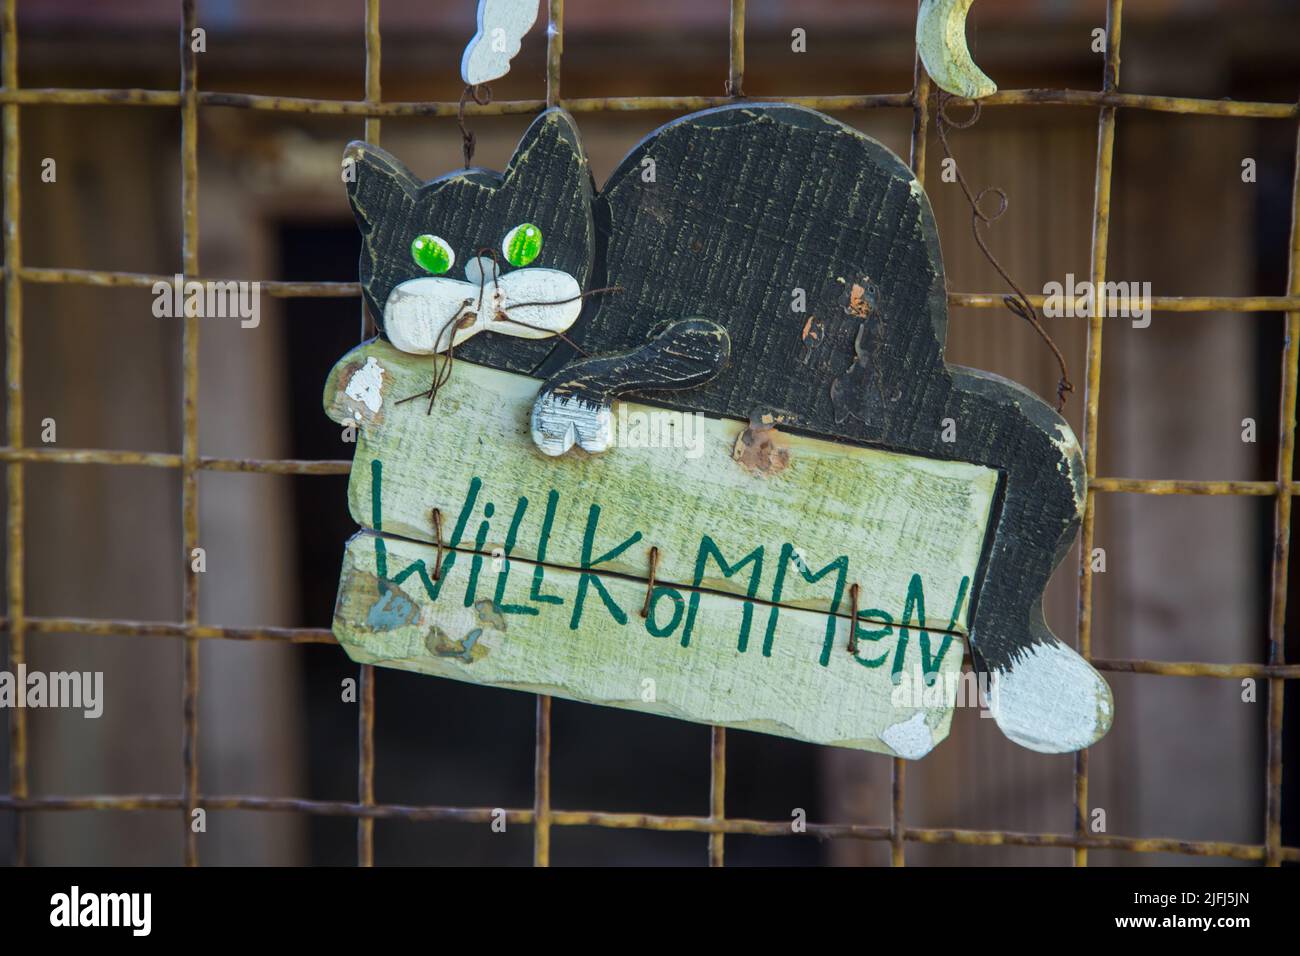 Welcome sign with a cat in german language, Lusatia, Germany Stock Photo